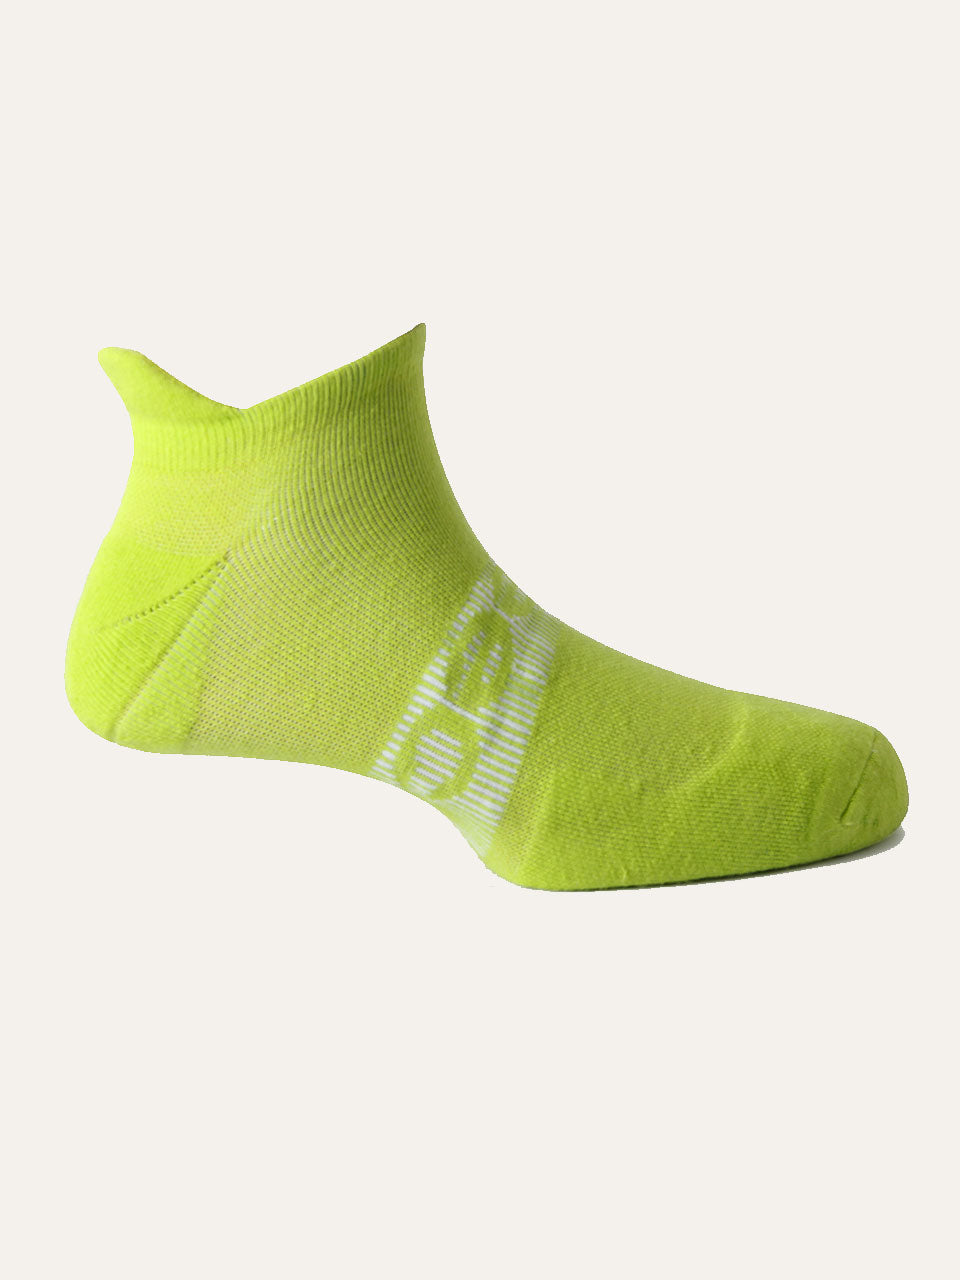 Bamboo Active Socks - Pack of 3